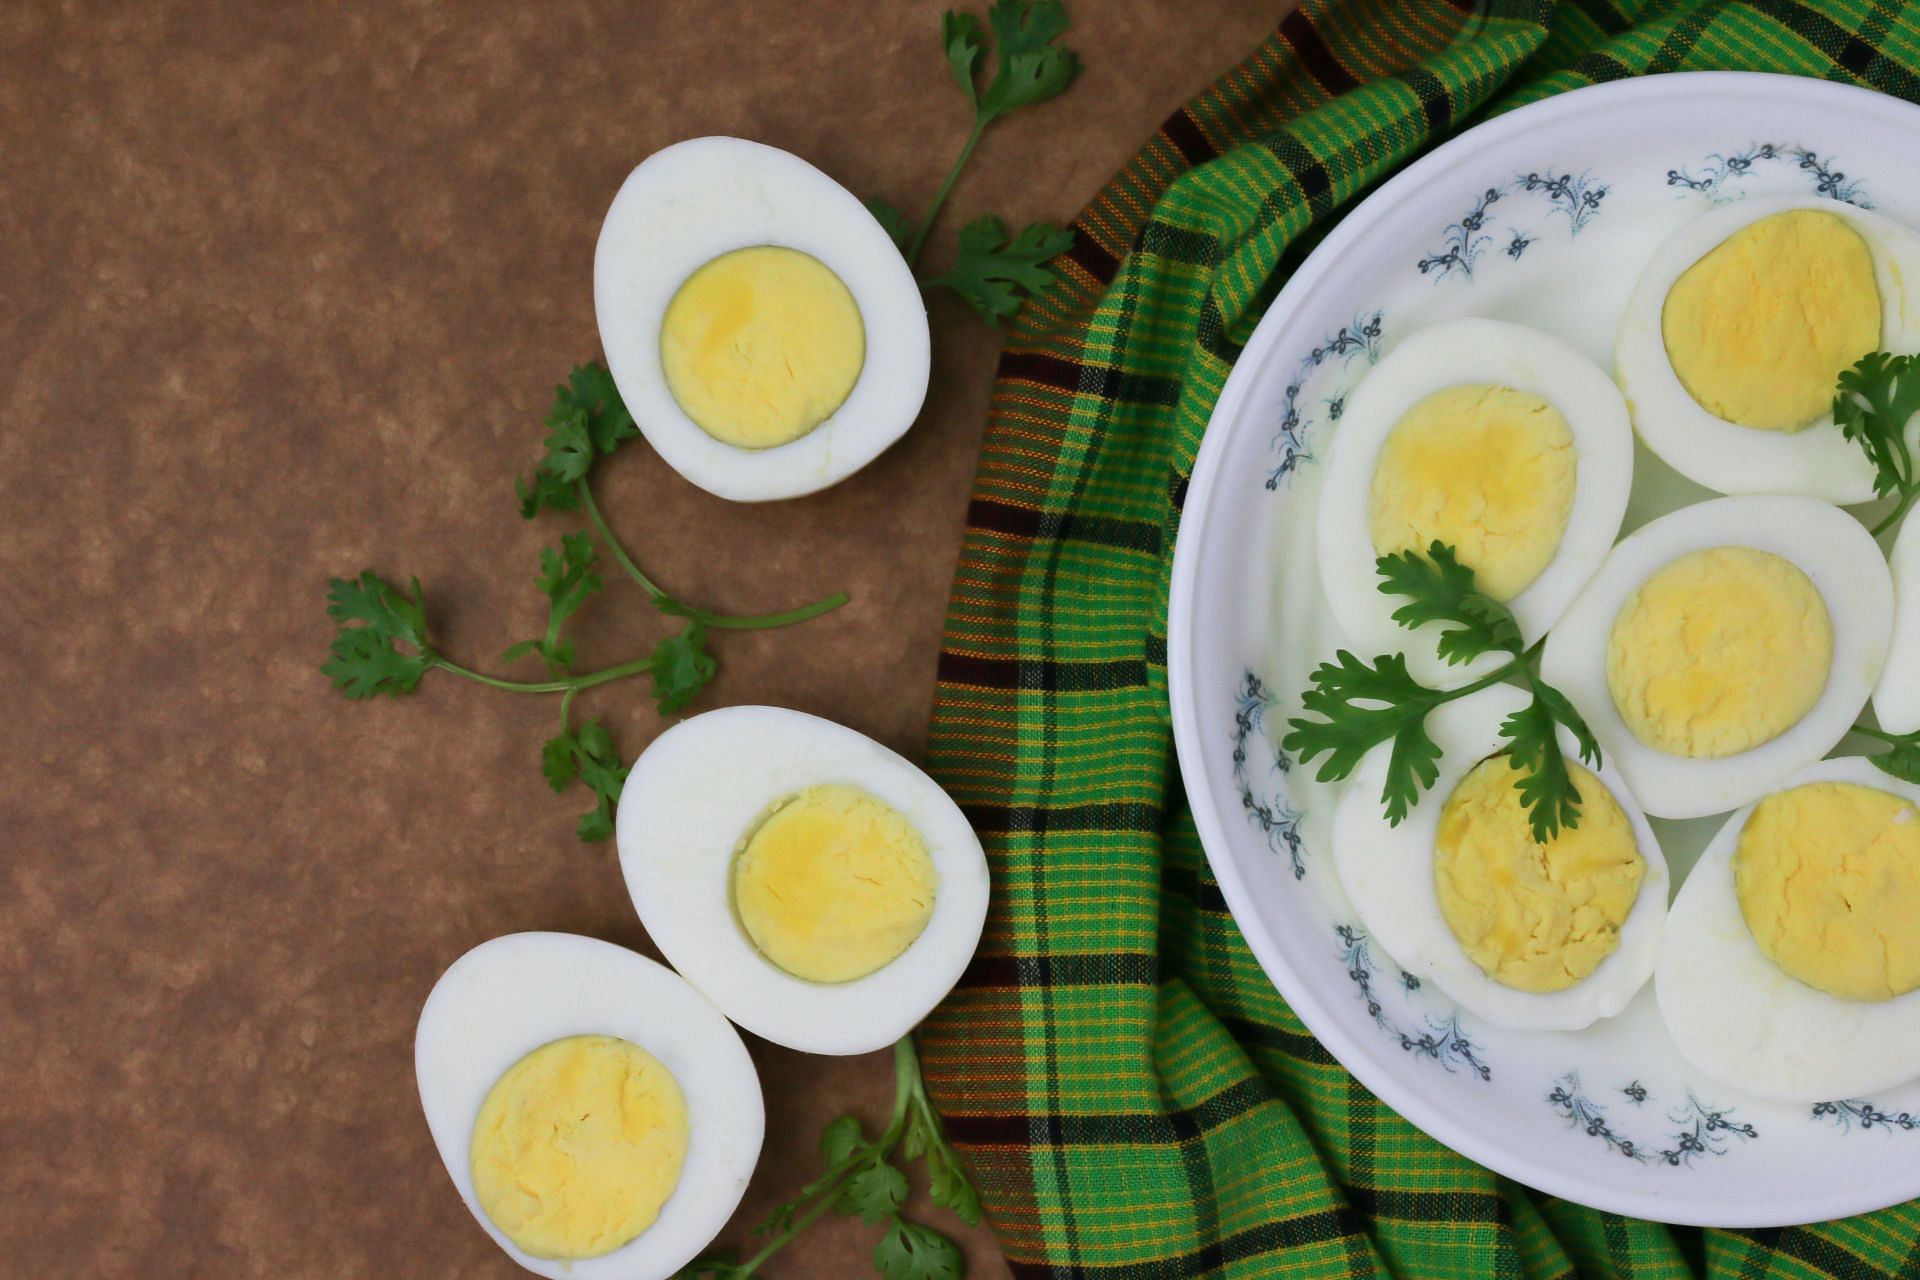 Boiled eggs can be a good way to reduce carb intake. (Image via Unsplash/Tamanna Rumee)